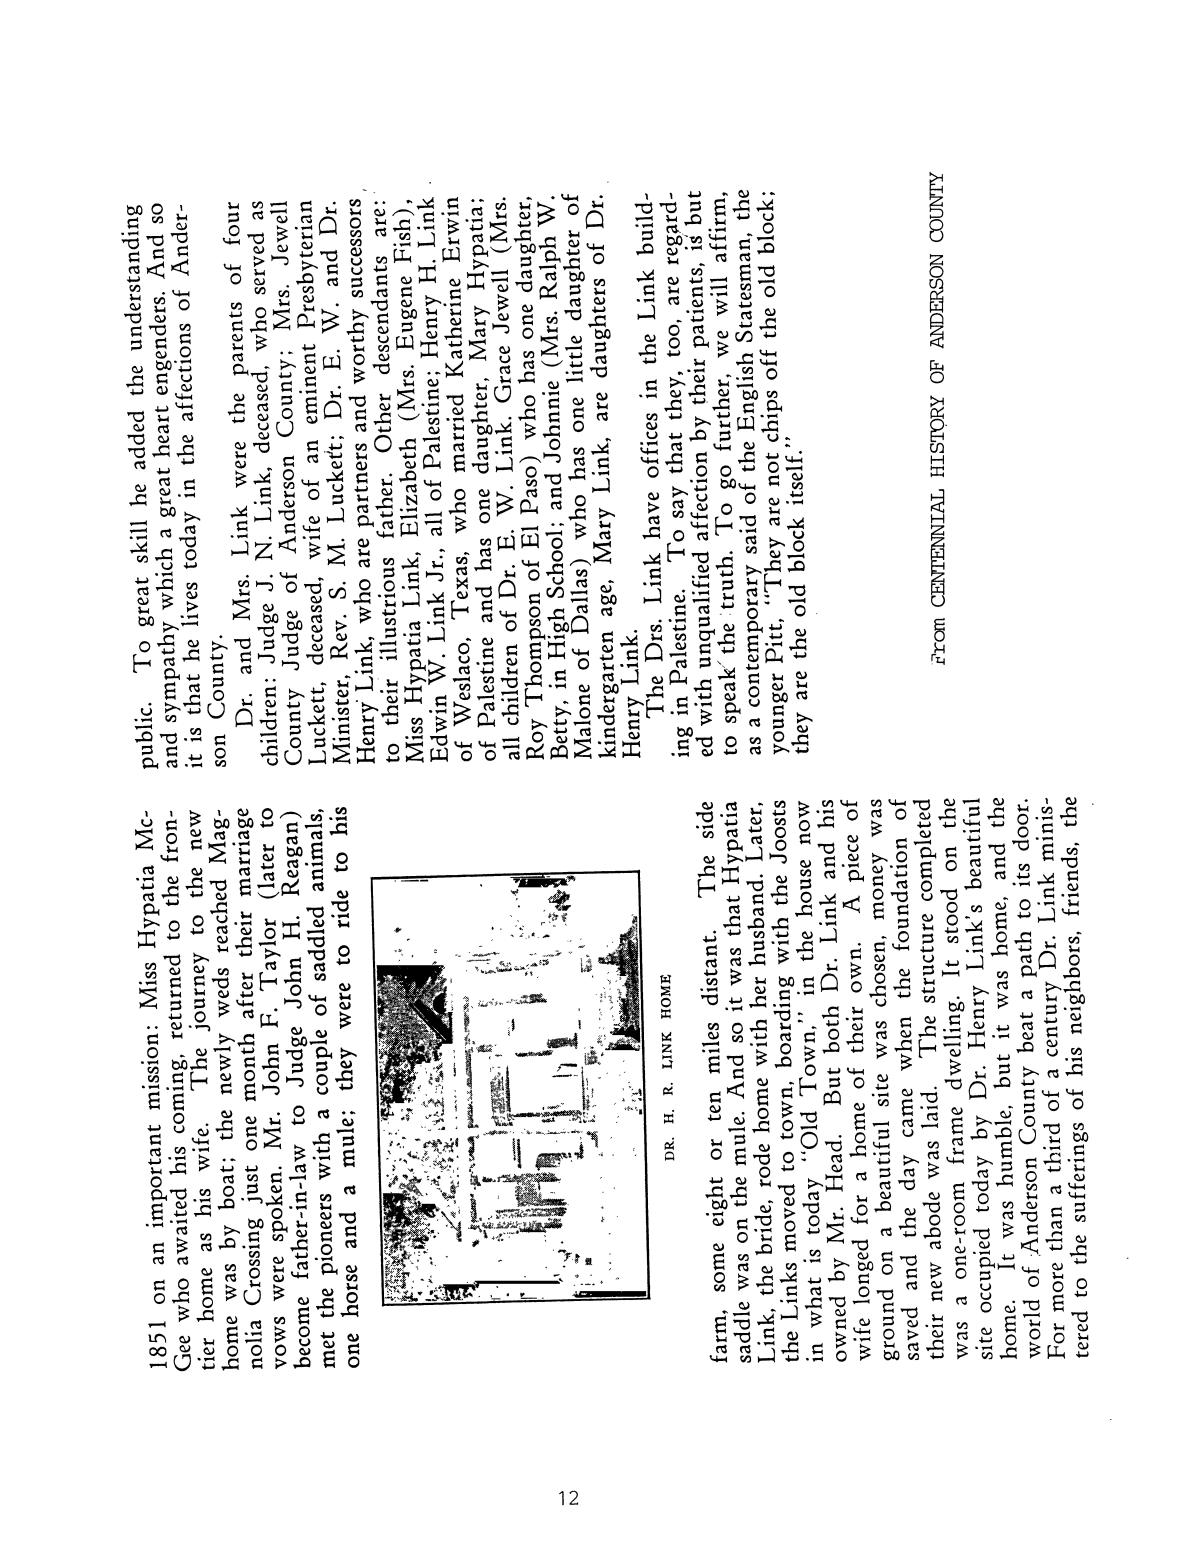 The Tracings, Volume 14, Number 1, March 1995
                                                
                                                    12
                                                